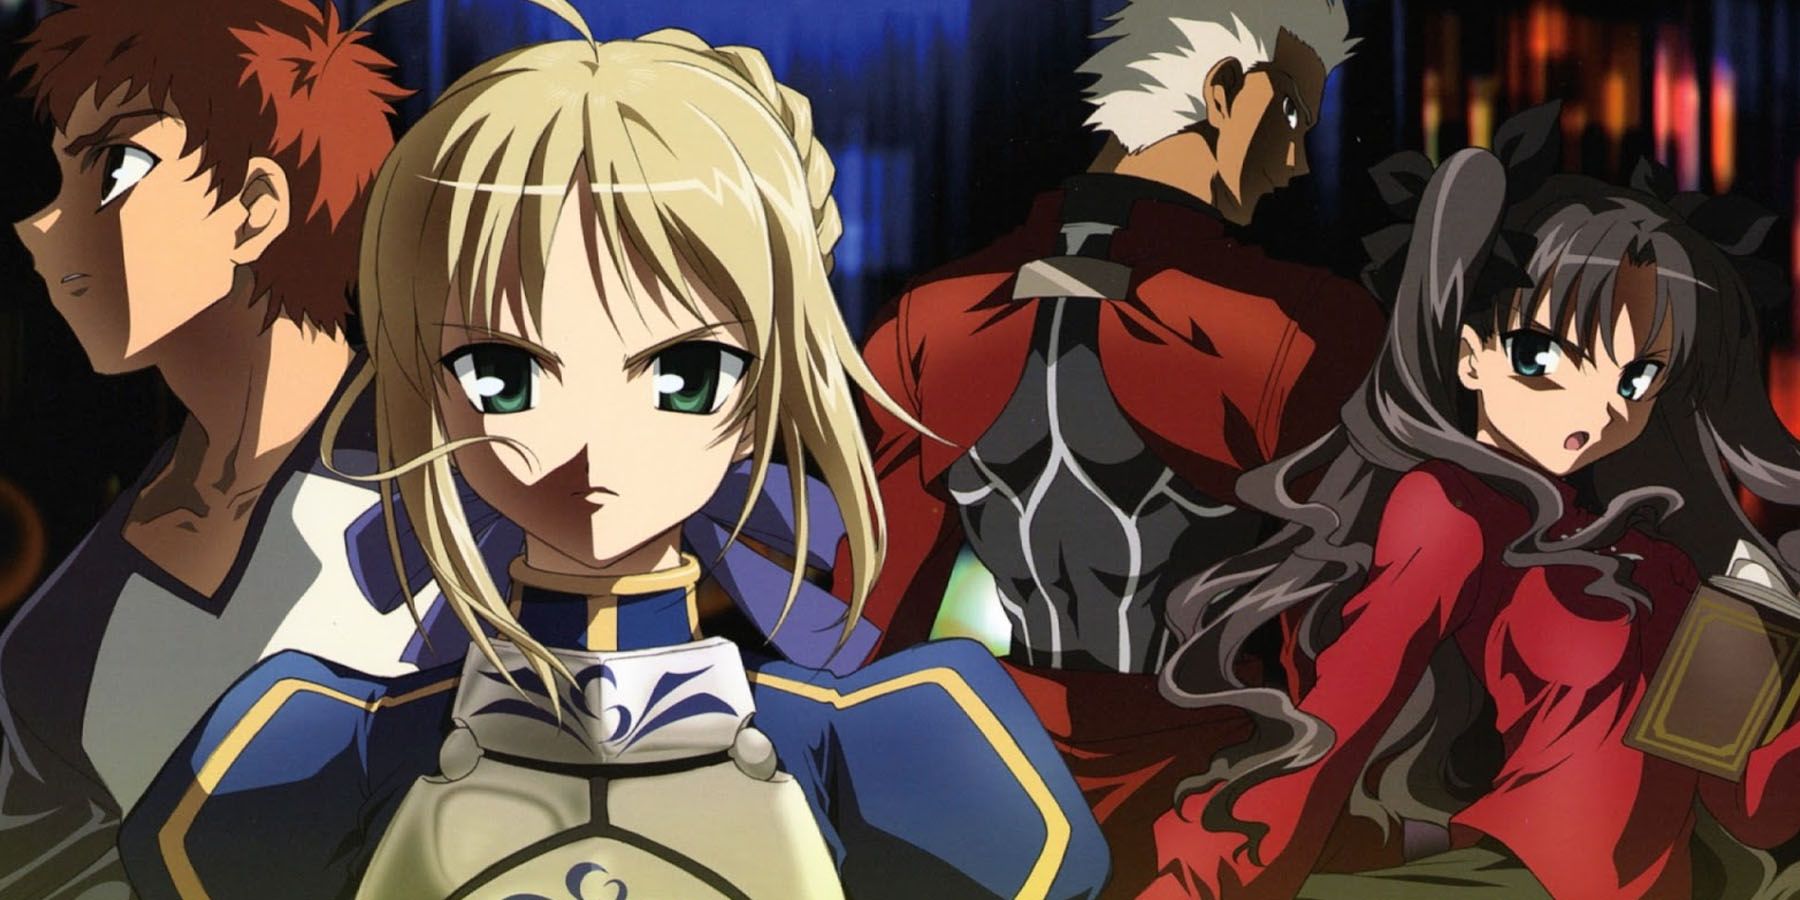 The main cast of Fate Stay Night 2006